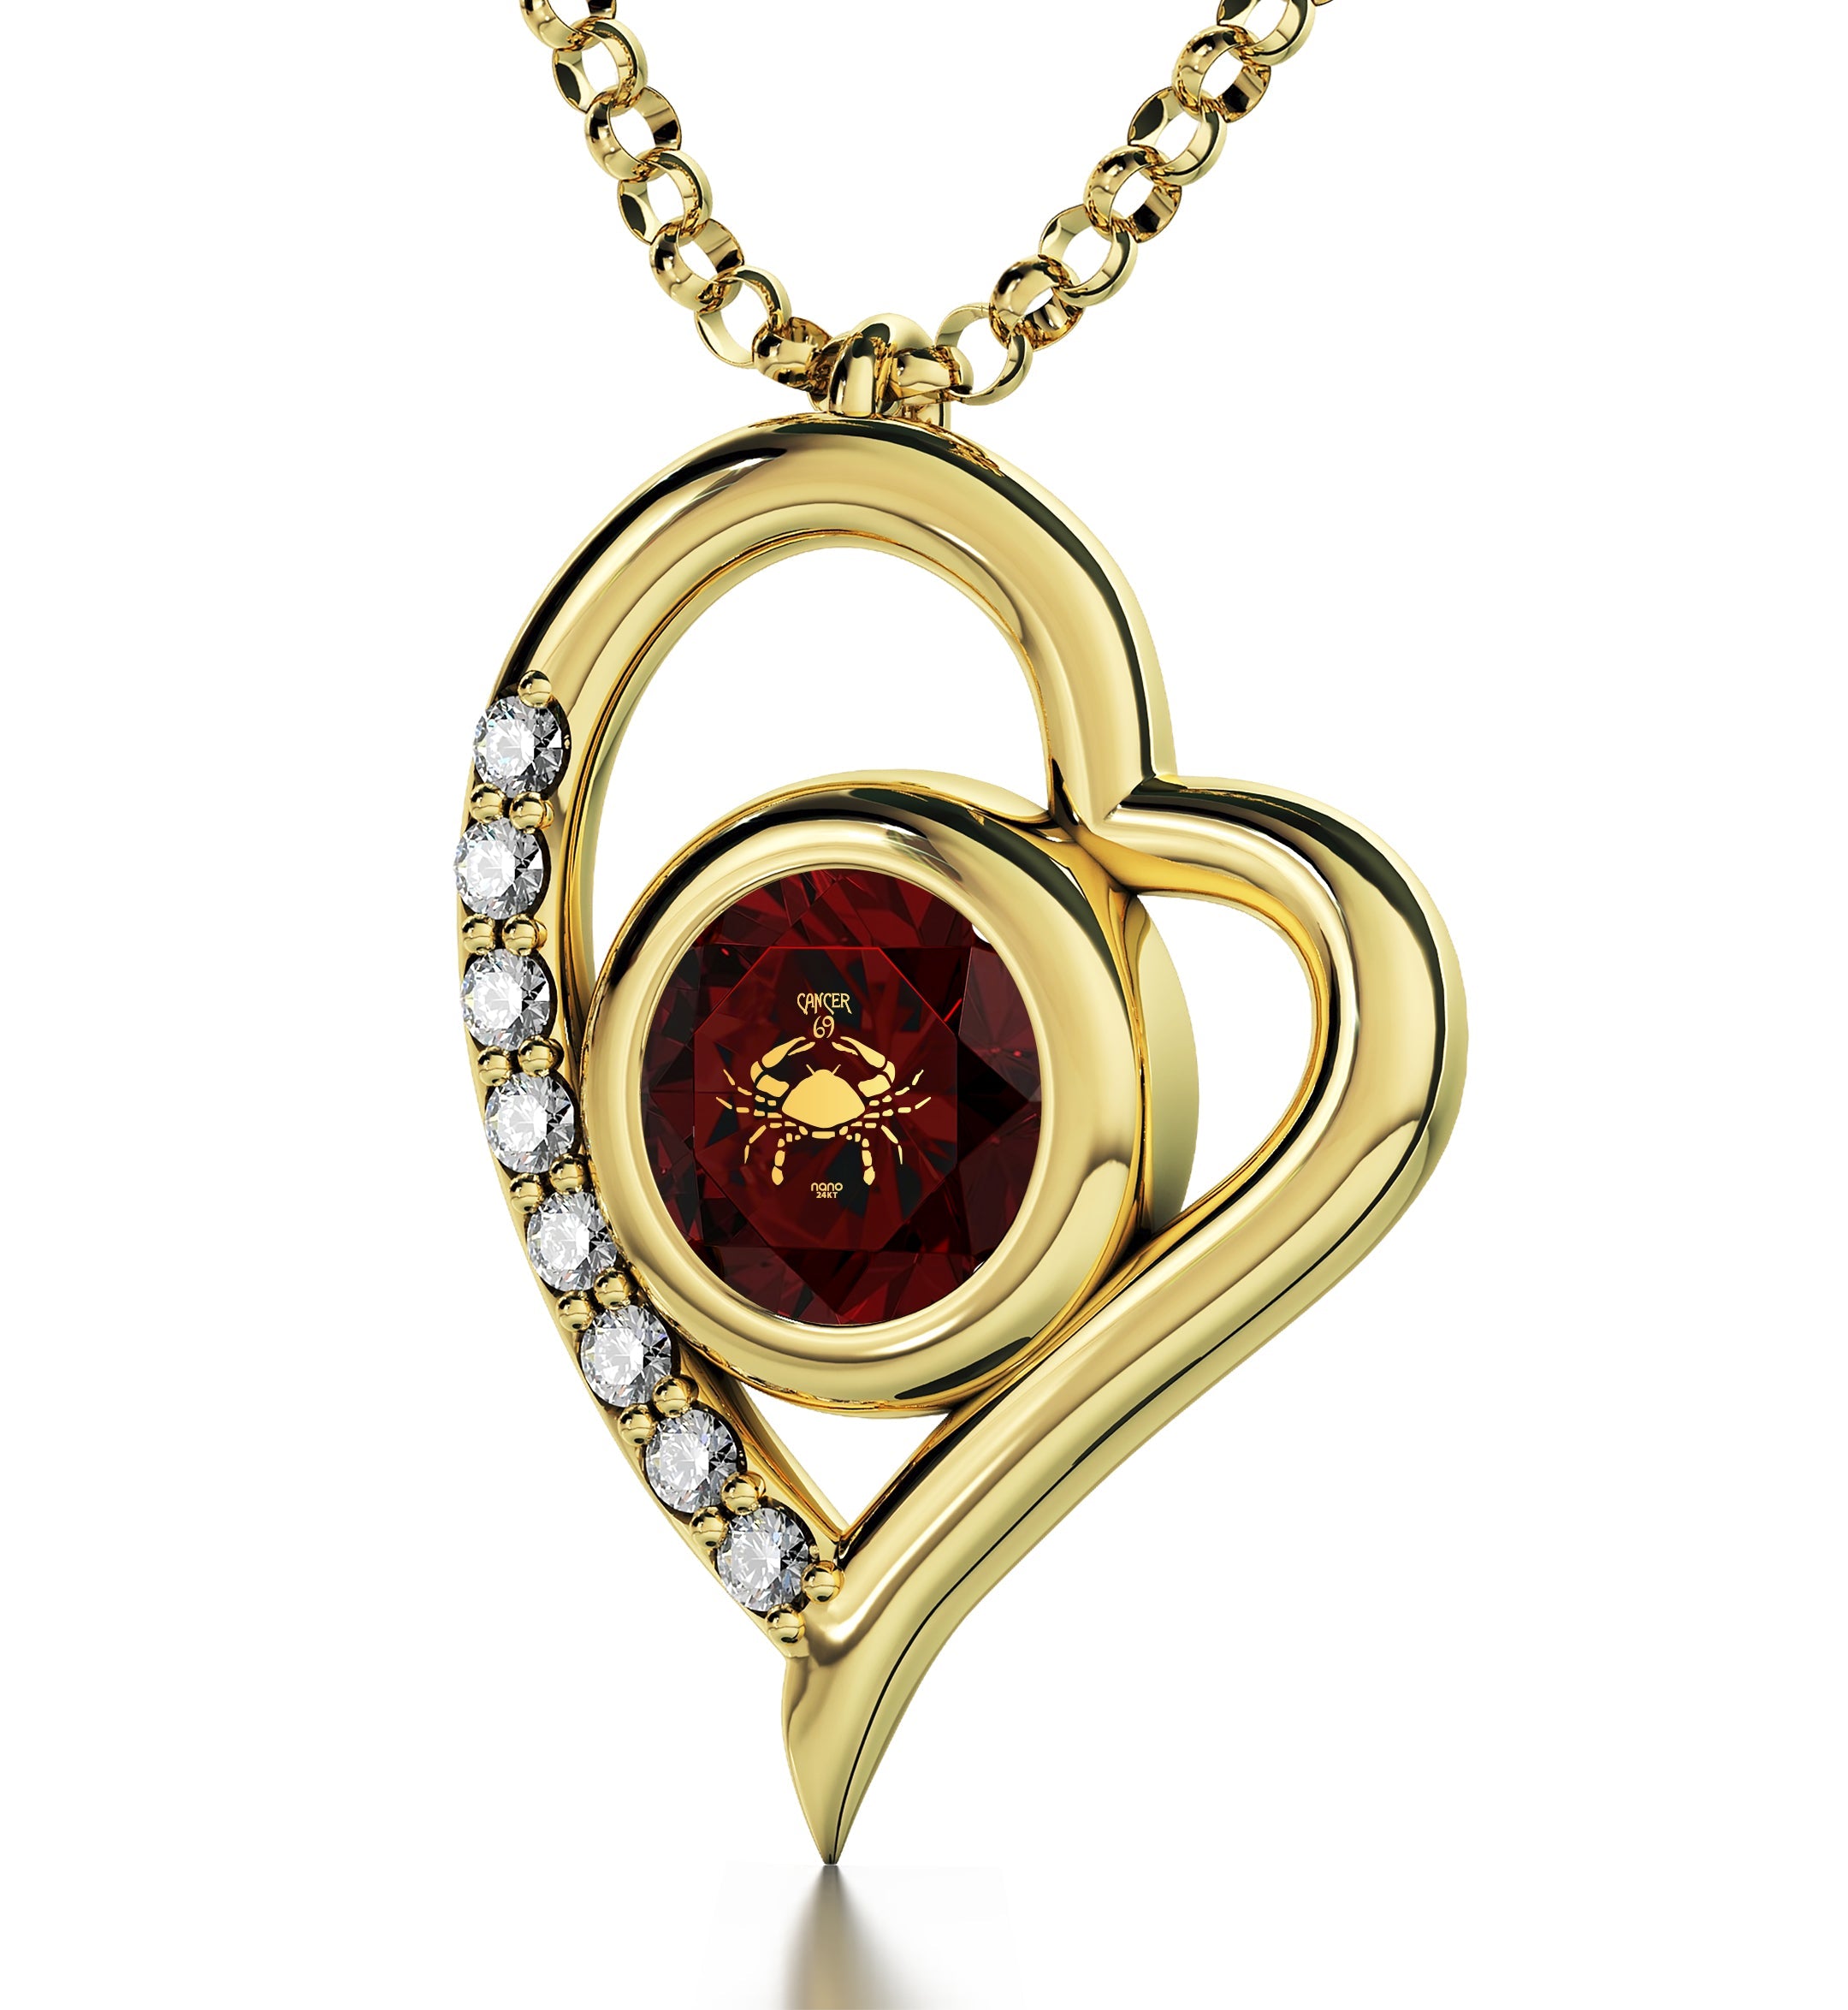 Gold Plated Silver Cancer Necklace Zodiac Heart Pendant featuring the cancer zodiac sign with Swarovski crystals on a chain, and a small branded tag.